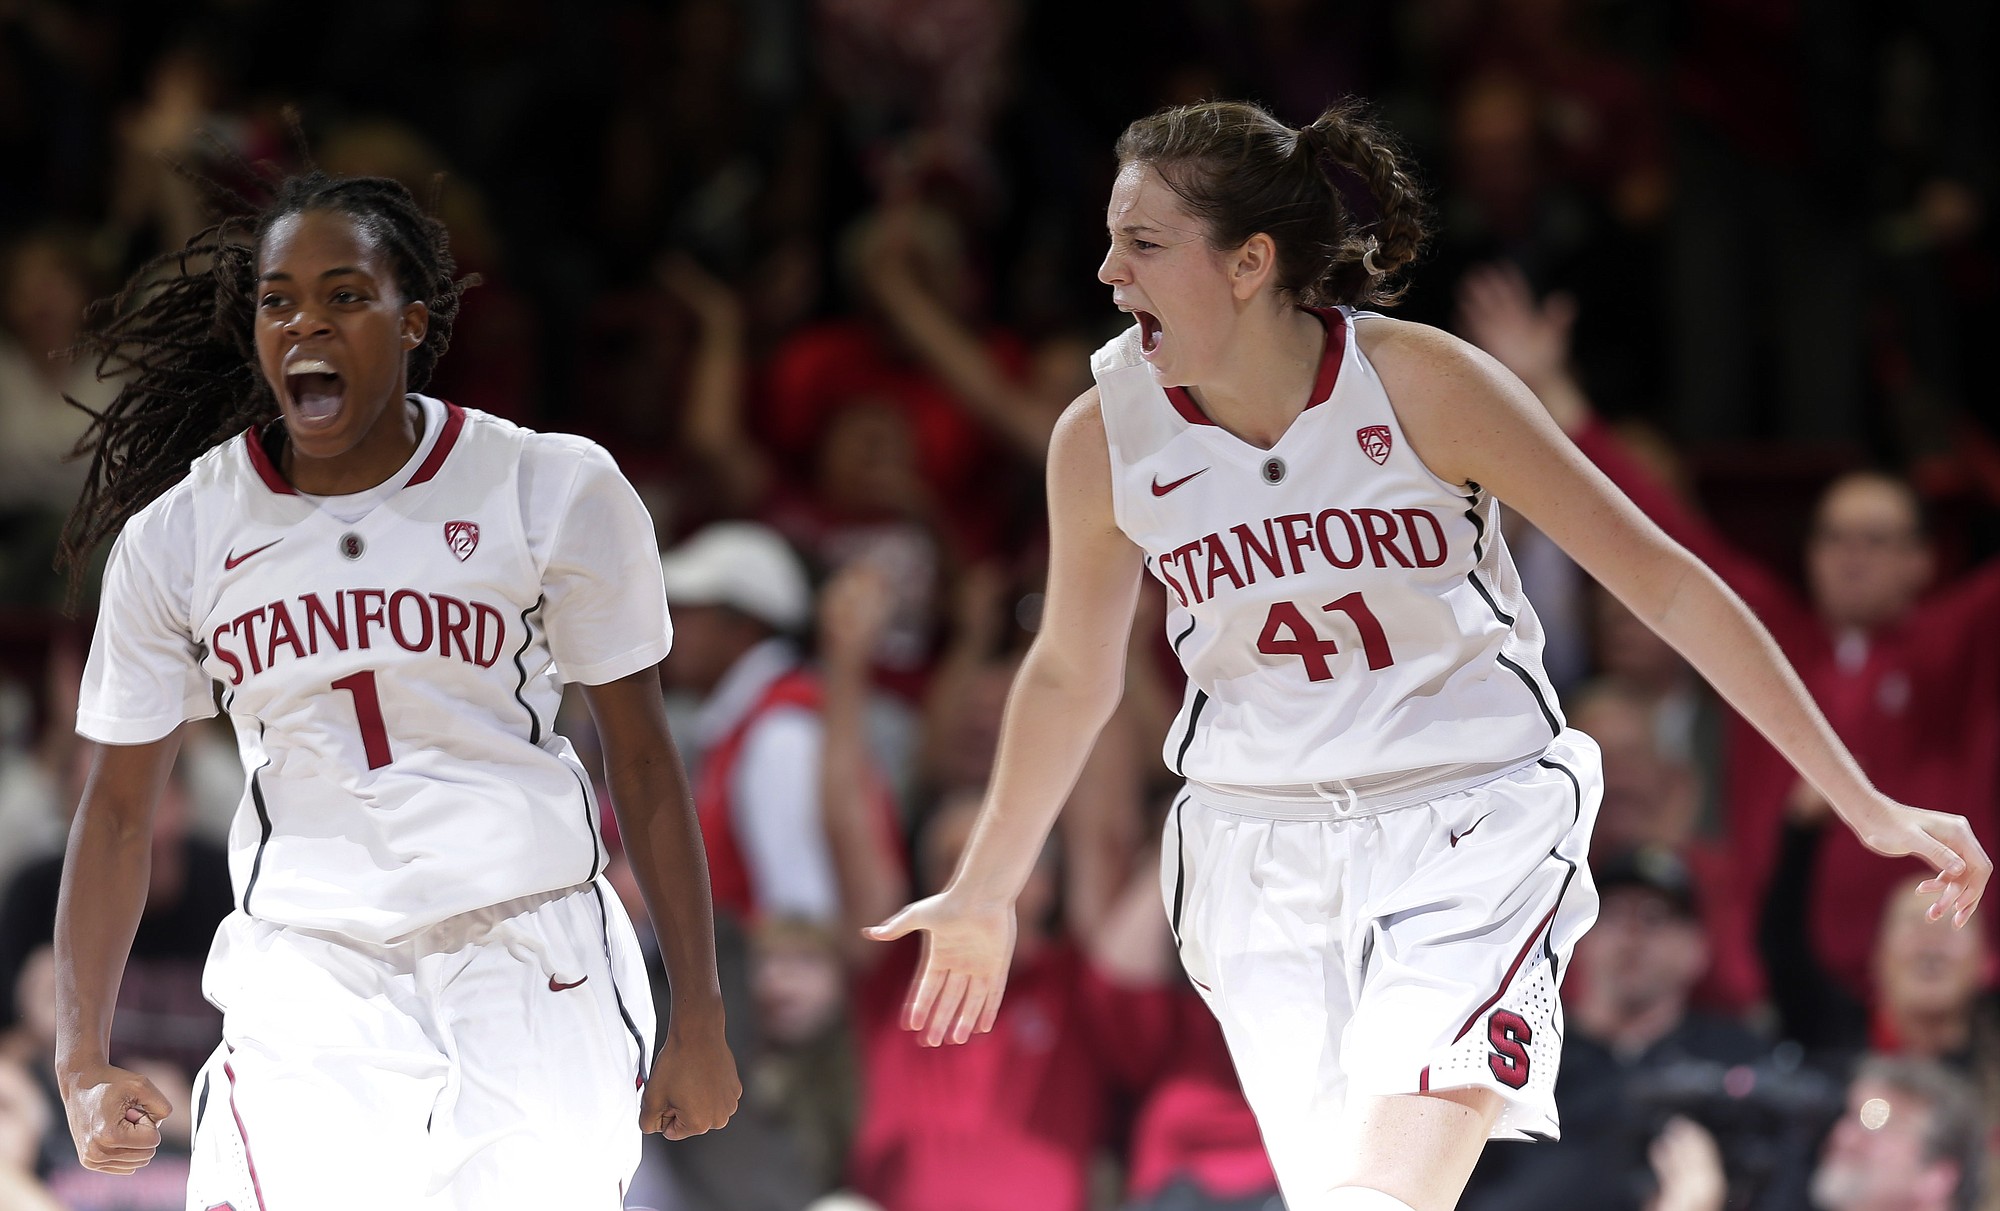 Stanford forward Bonnie Samuelson (41) celebrates with teammate Lili Thompson (1) after Samuelson's three-point basket against Connecticut during the first half Monday, Nov. 17, 2014, in Stanford, Calif.